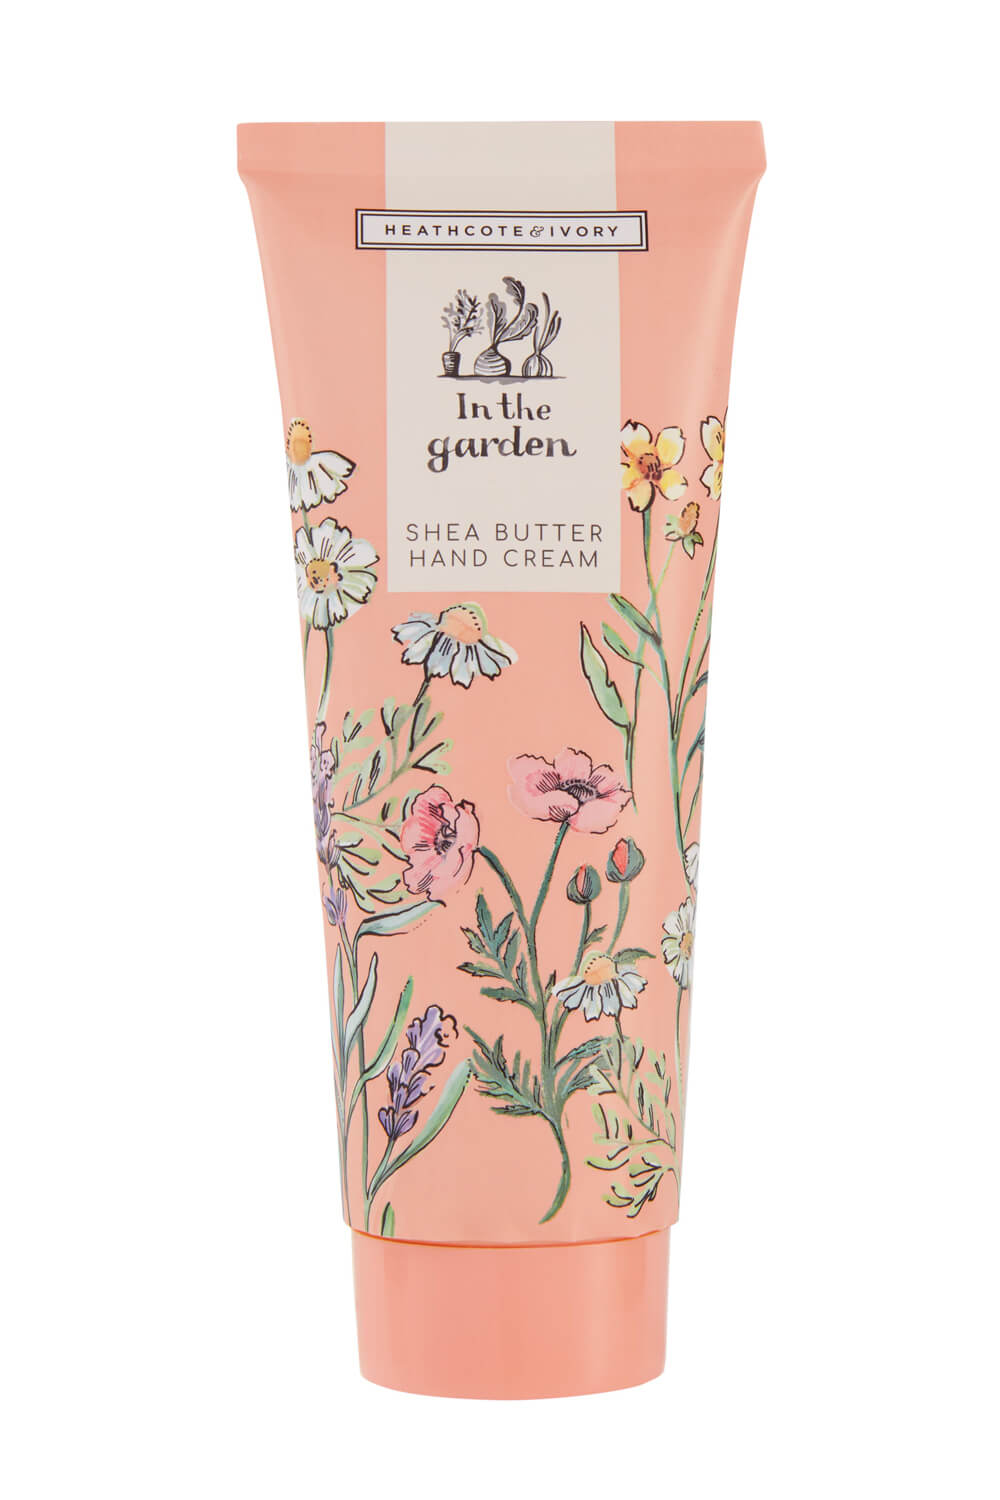  Heathcote & Ivory - In The Garden Shea Butter Hand Cream, Image 2 of 5